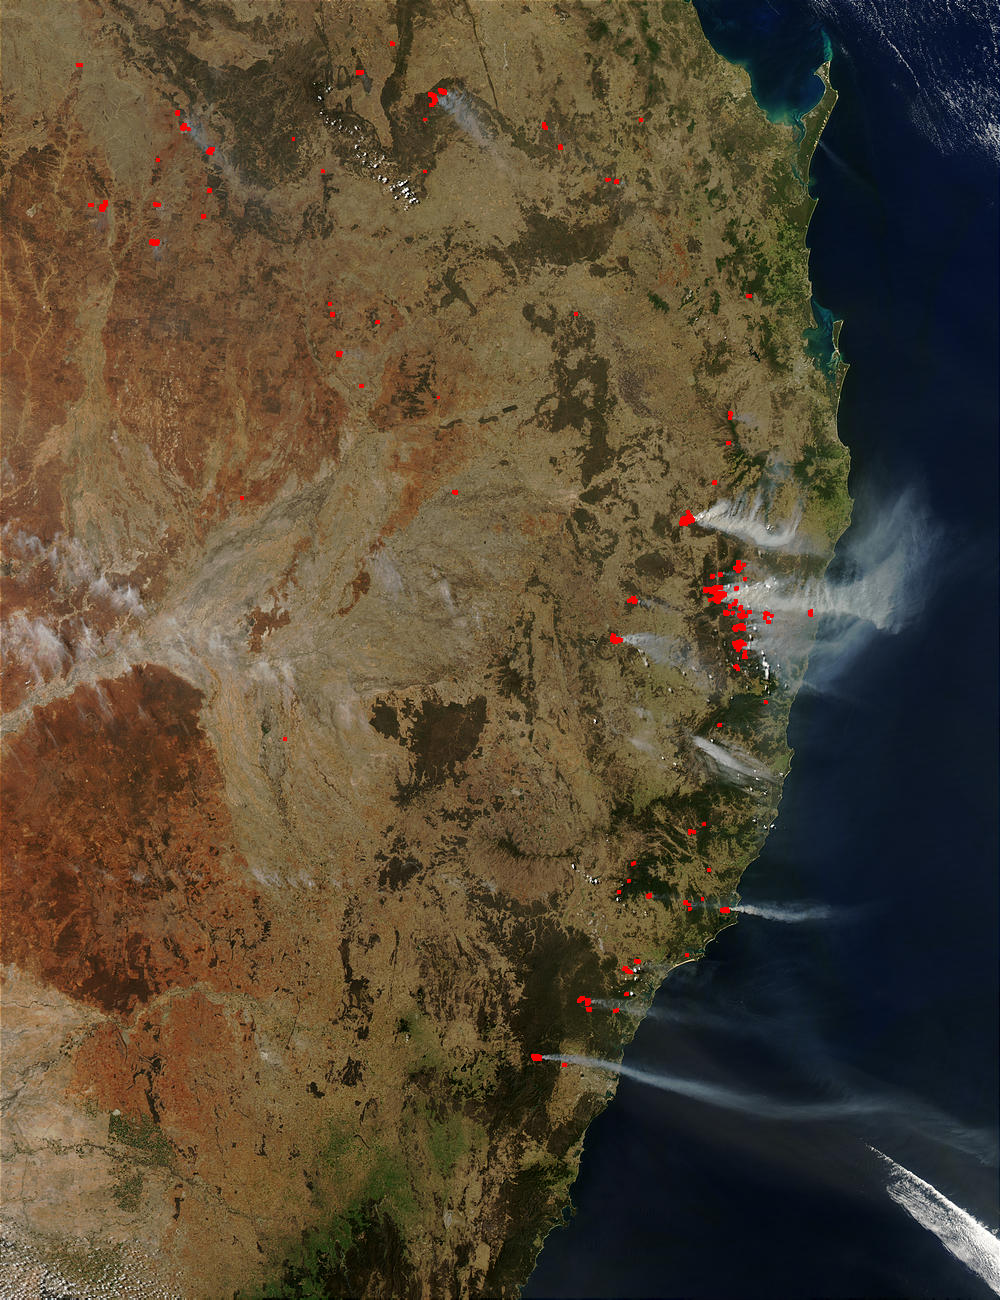 Fires in Queensland and New South Wales, Australia - related image preview